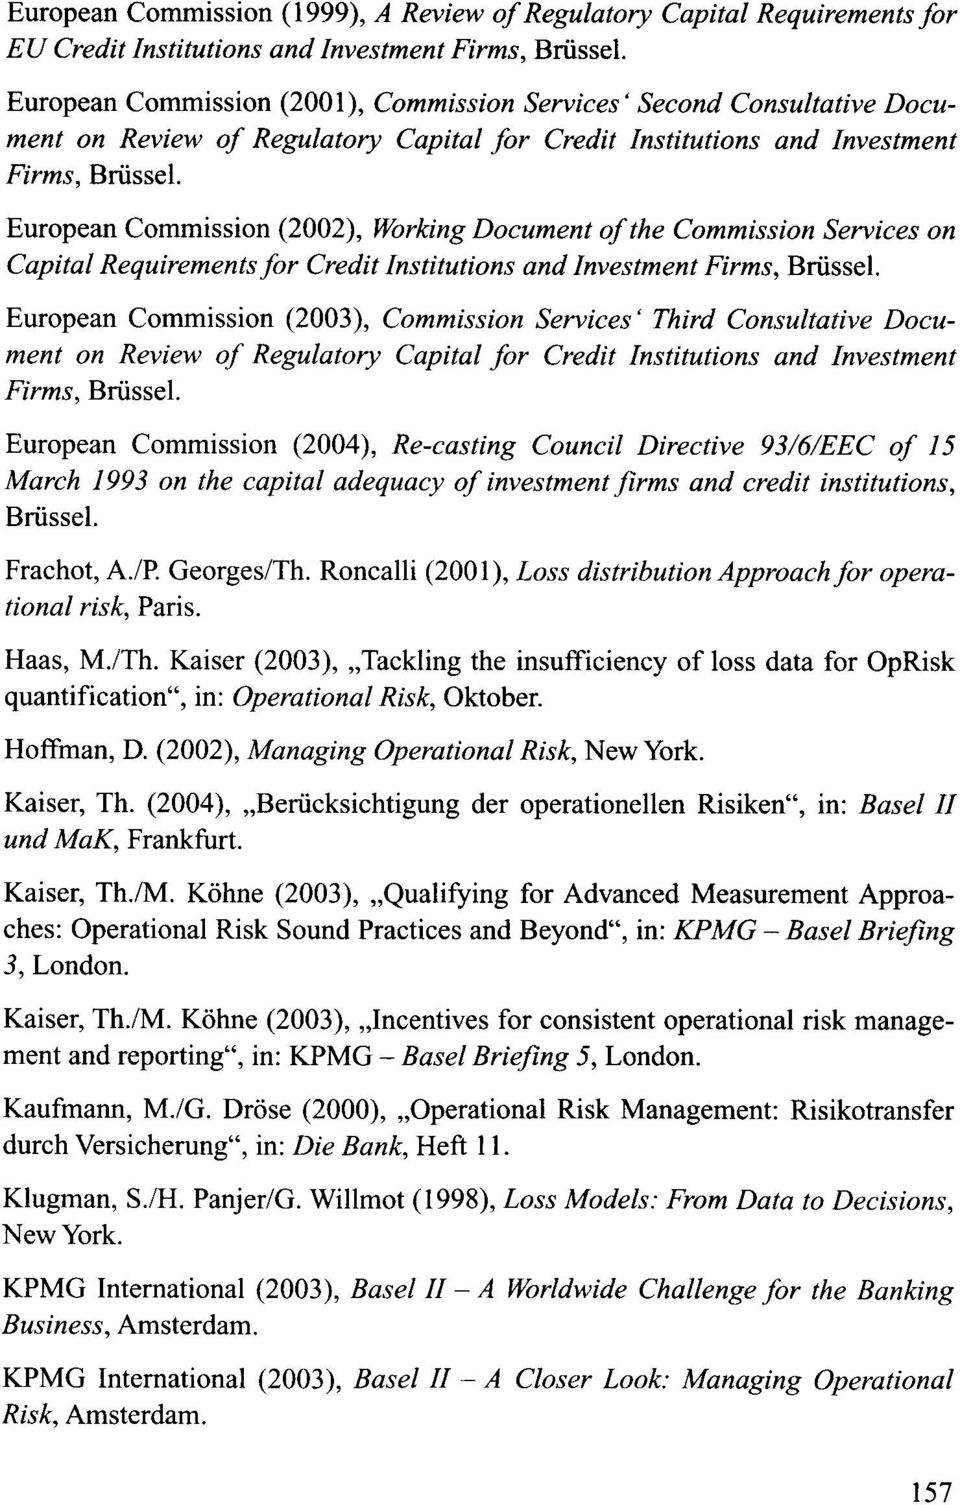 European Commission (2002), Working Document 01 the Commission Services on Capital Requirements lor Credit Institutions and Investment Firms, Brüssel.